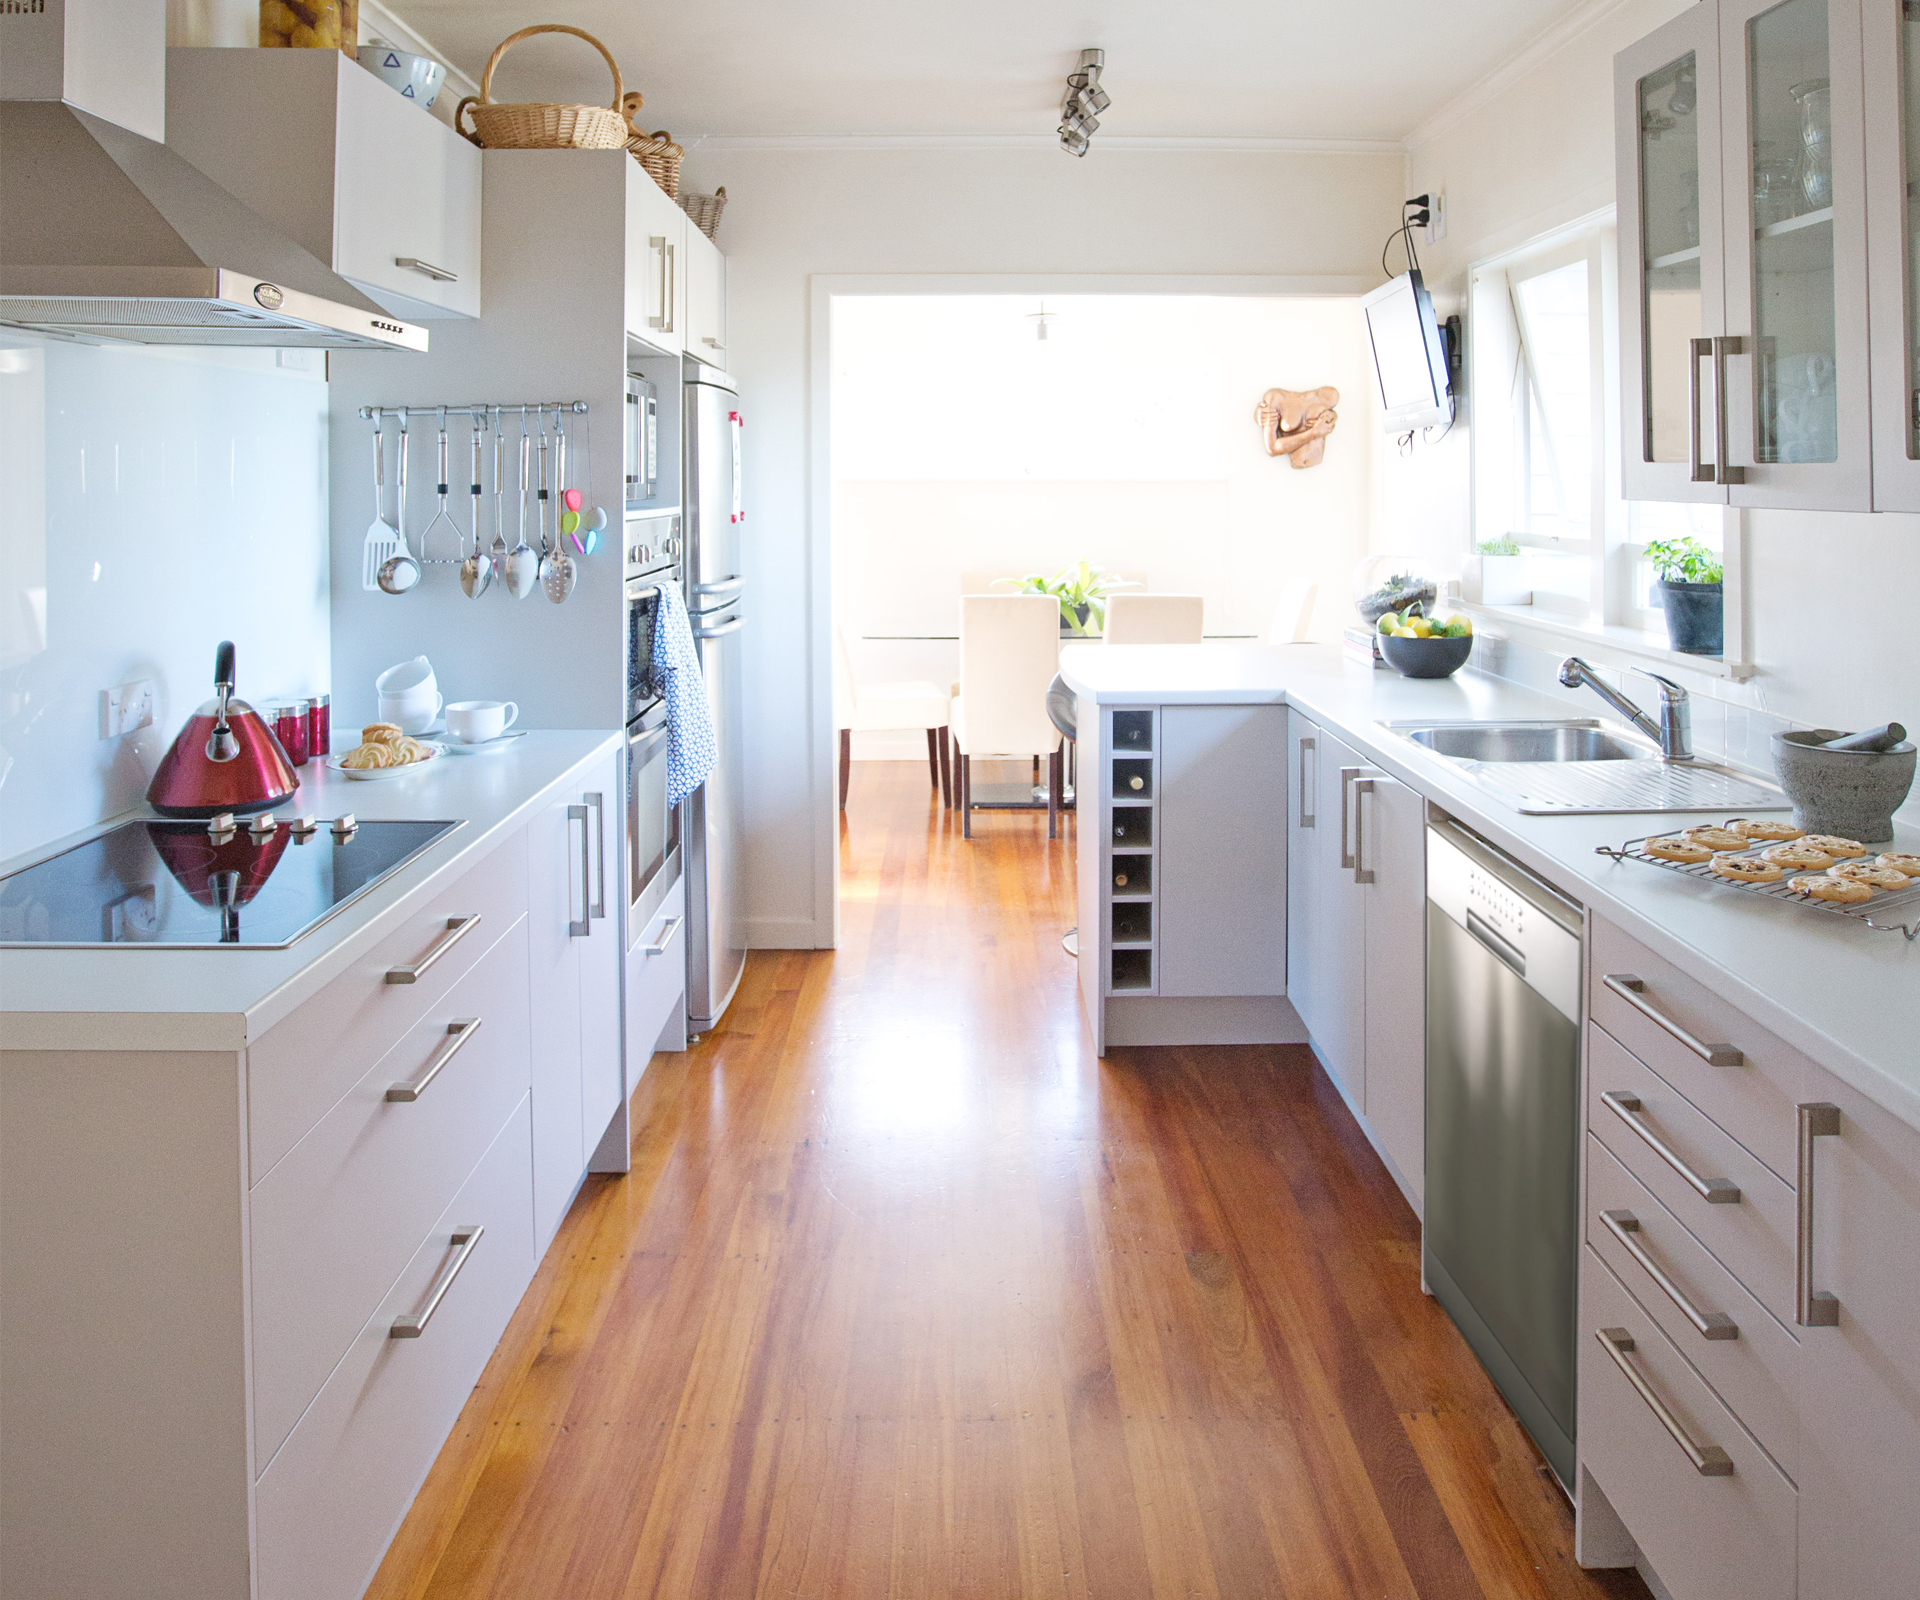 The pros and cons of a kitset kitchen